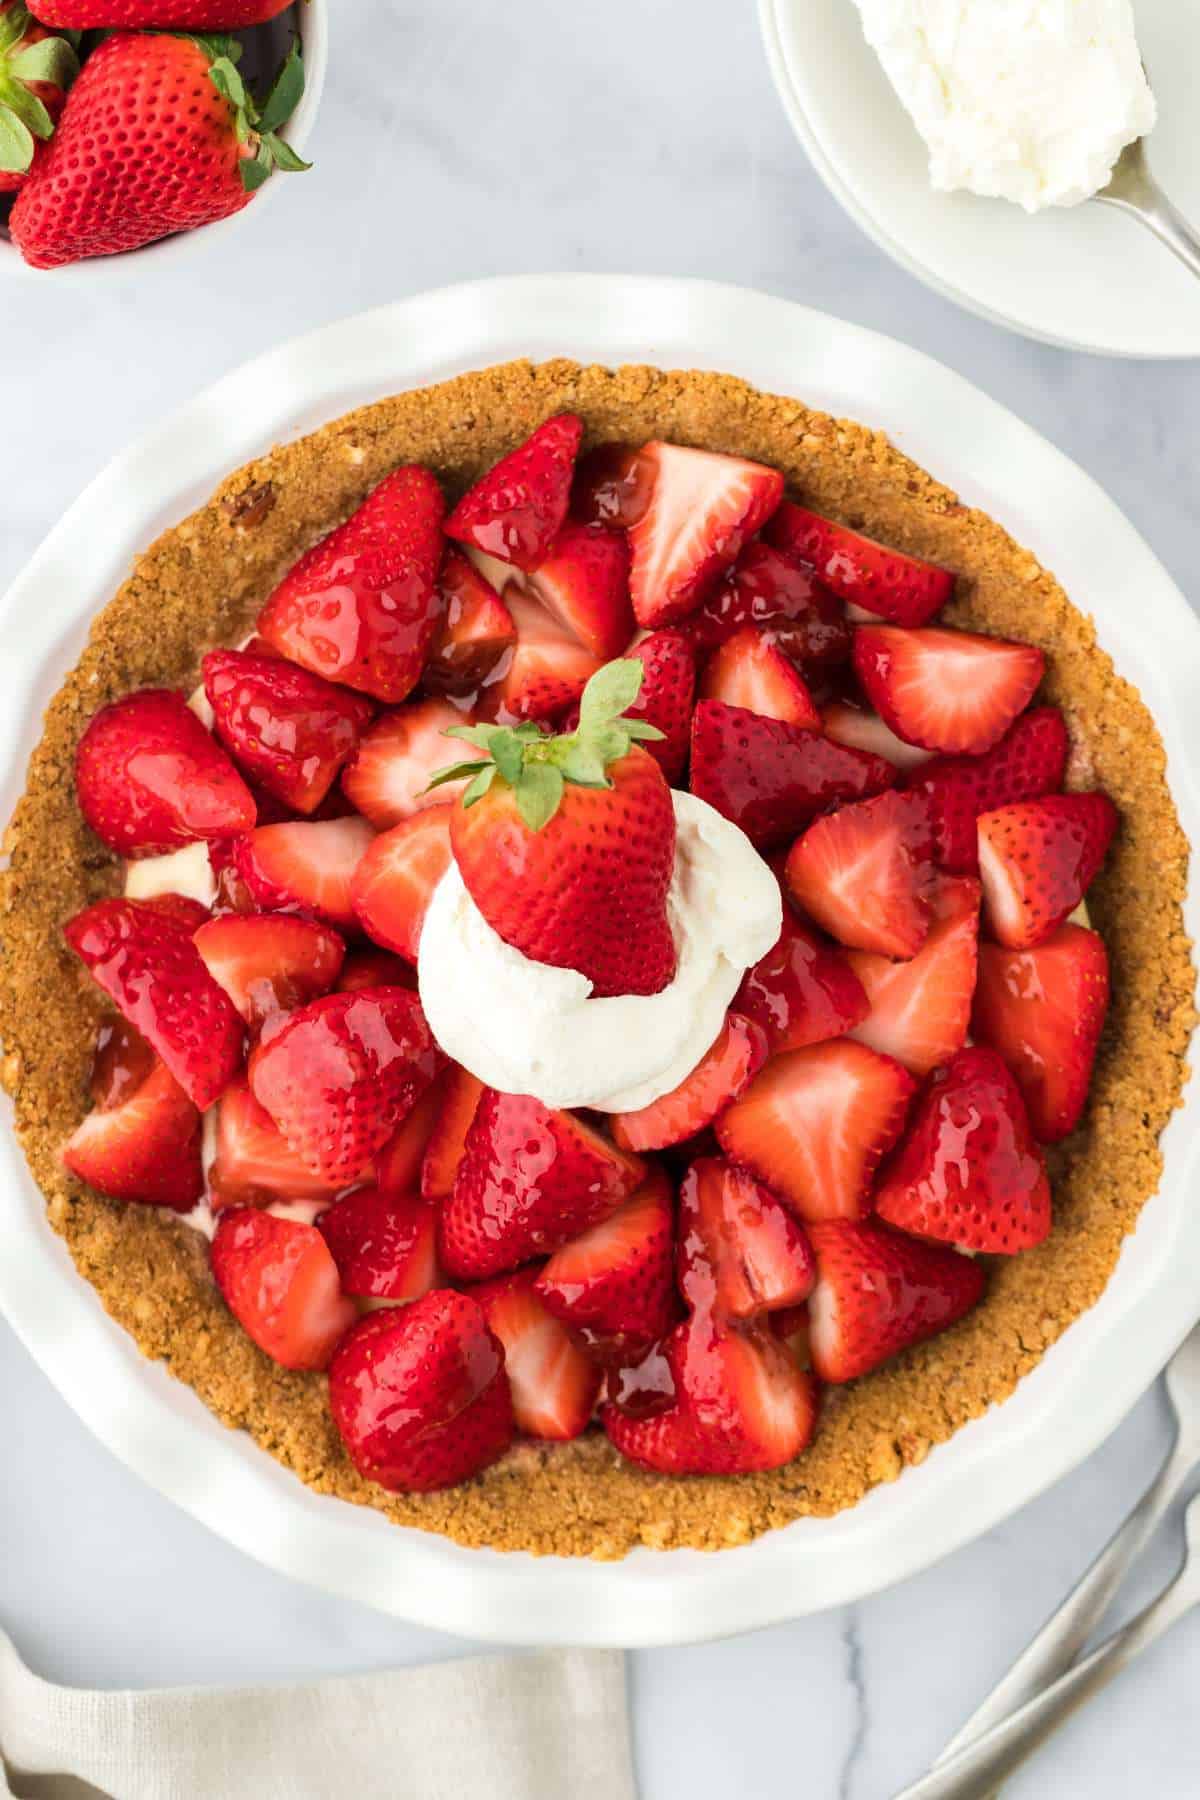 A strawberry tart topped with fresh whole strawberries and whipped cream.